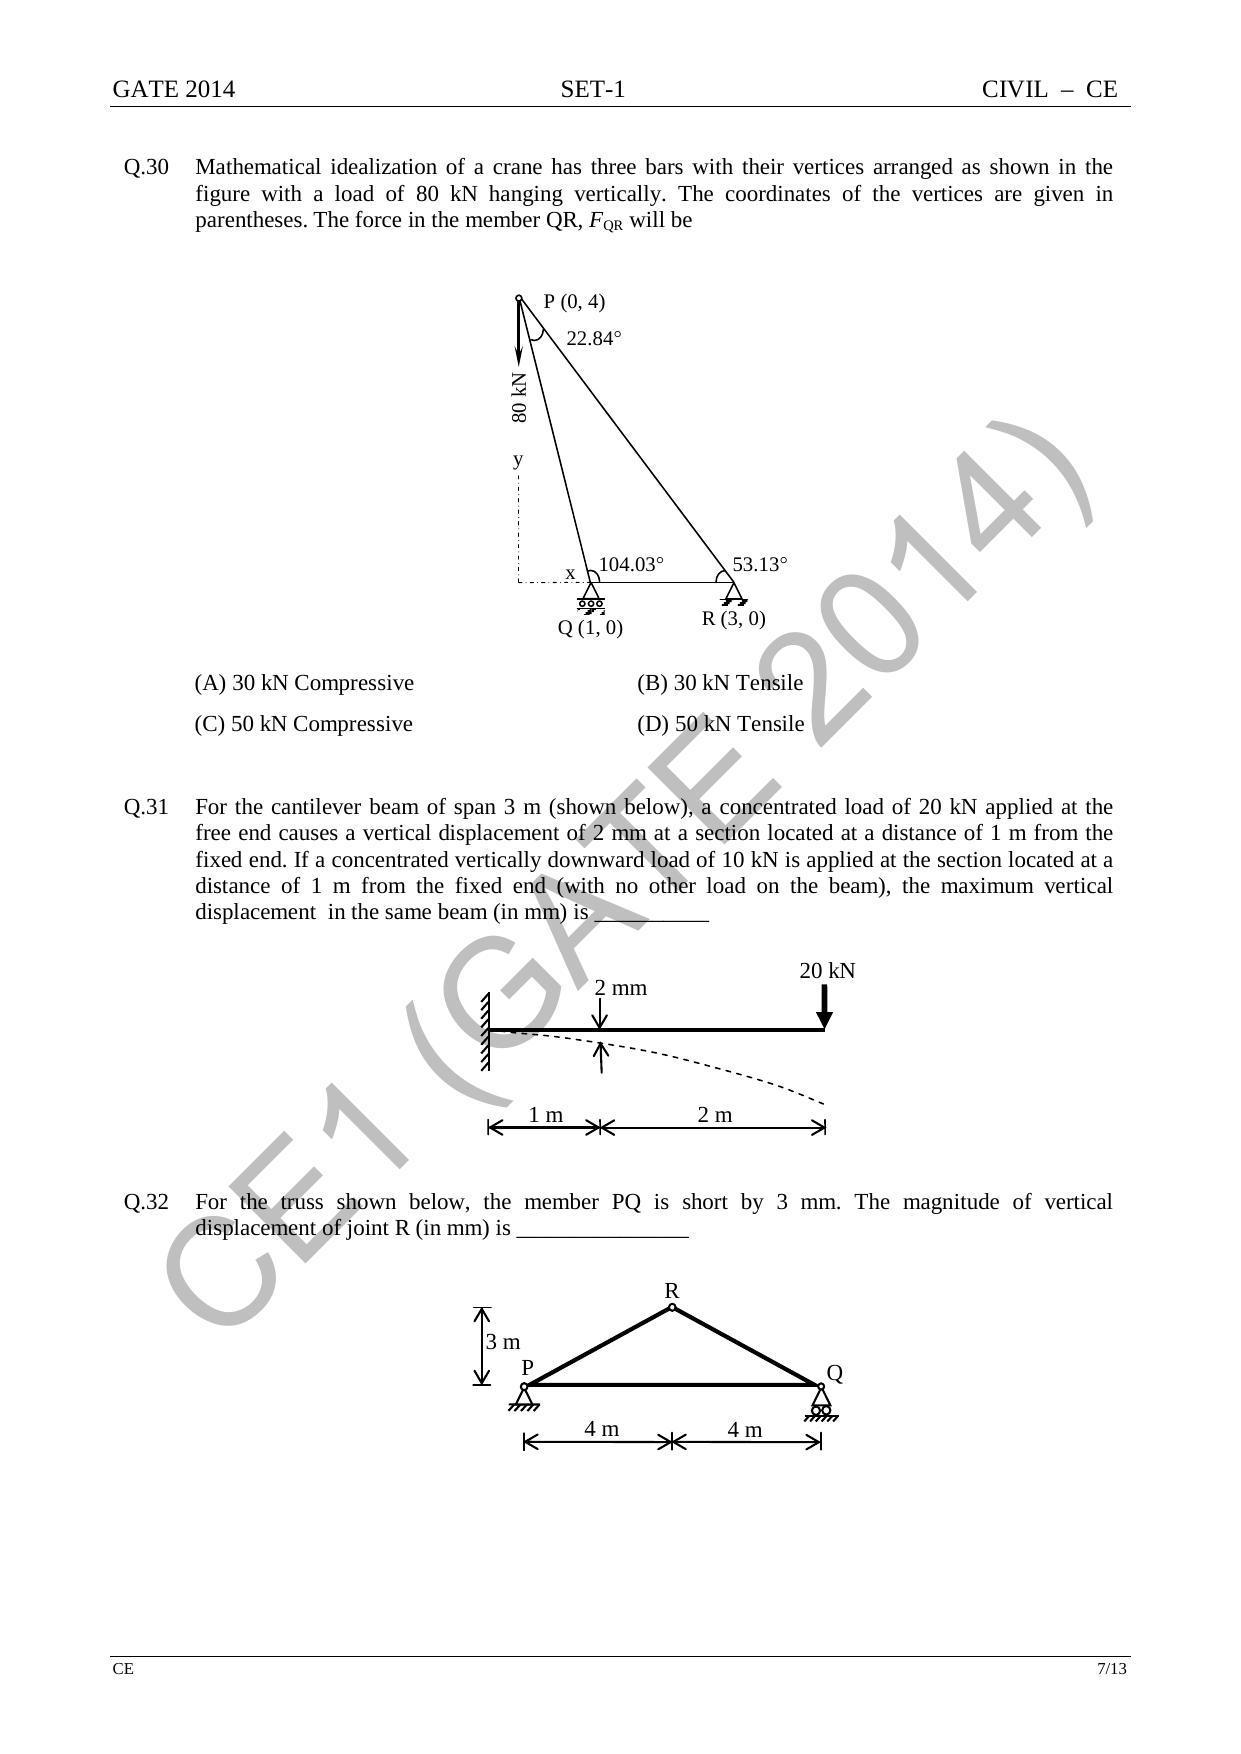 GATE 2014 Civil Engineering (CE) Question Paper with Answer Key - Page 14